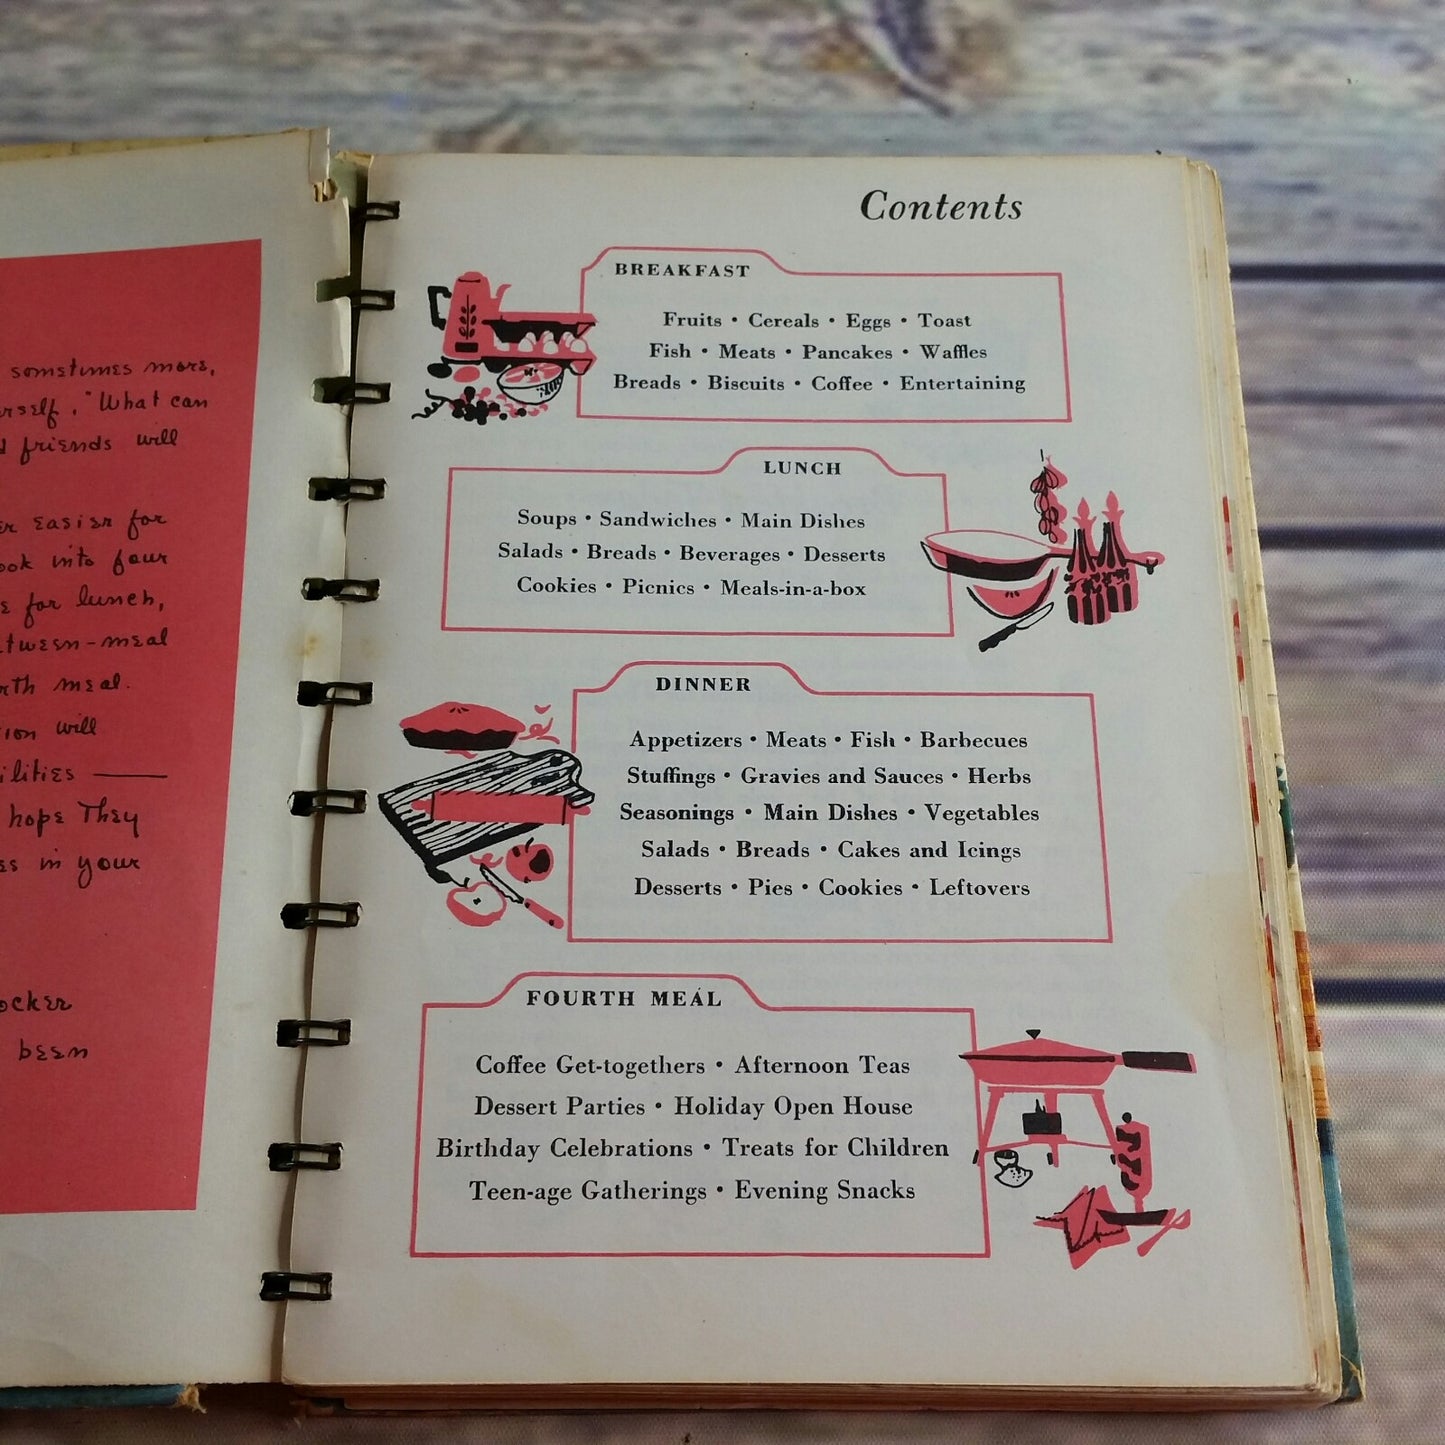 Vintage Betty Crocker Cook Book Good and Easy 1954 Recipes Spiral Bound Hardcover